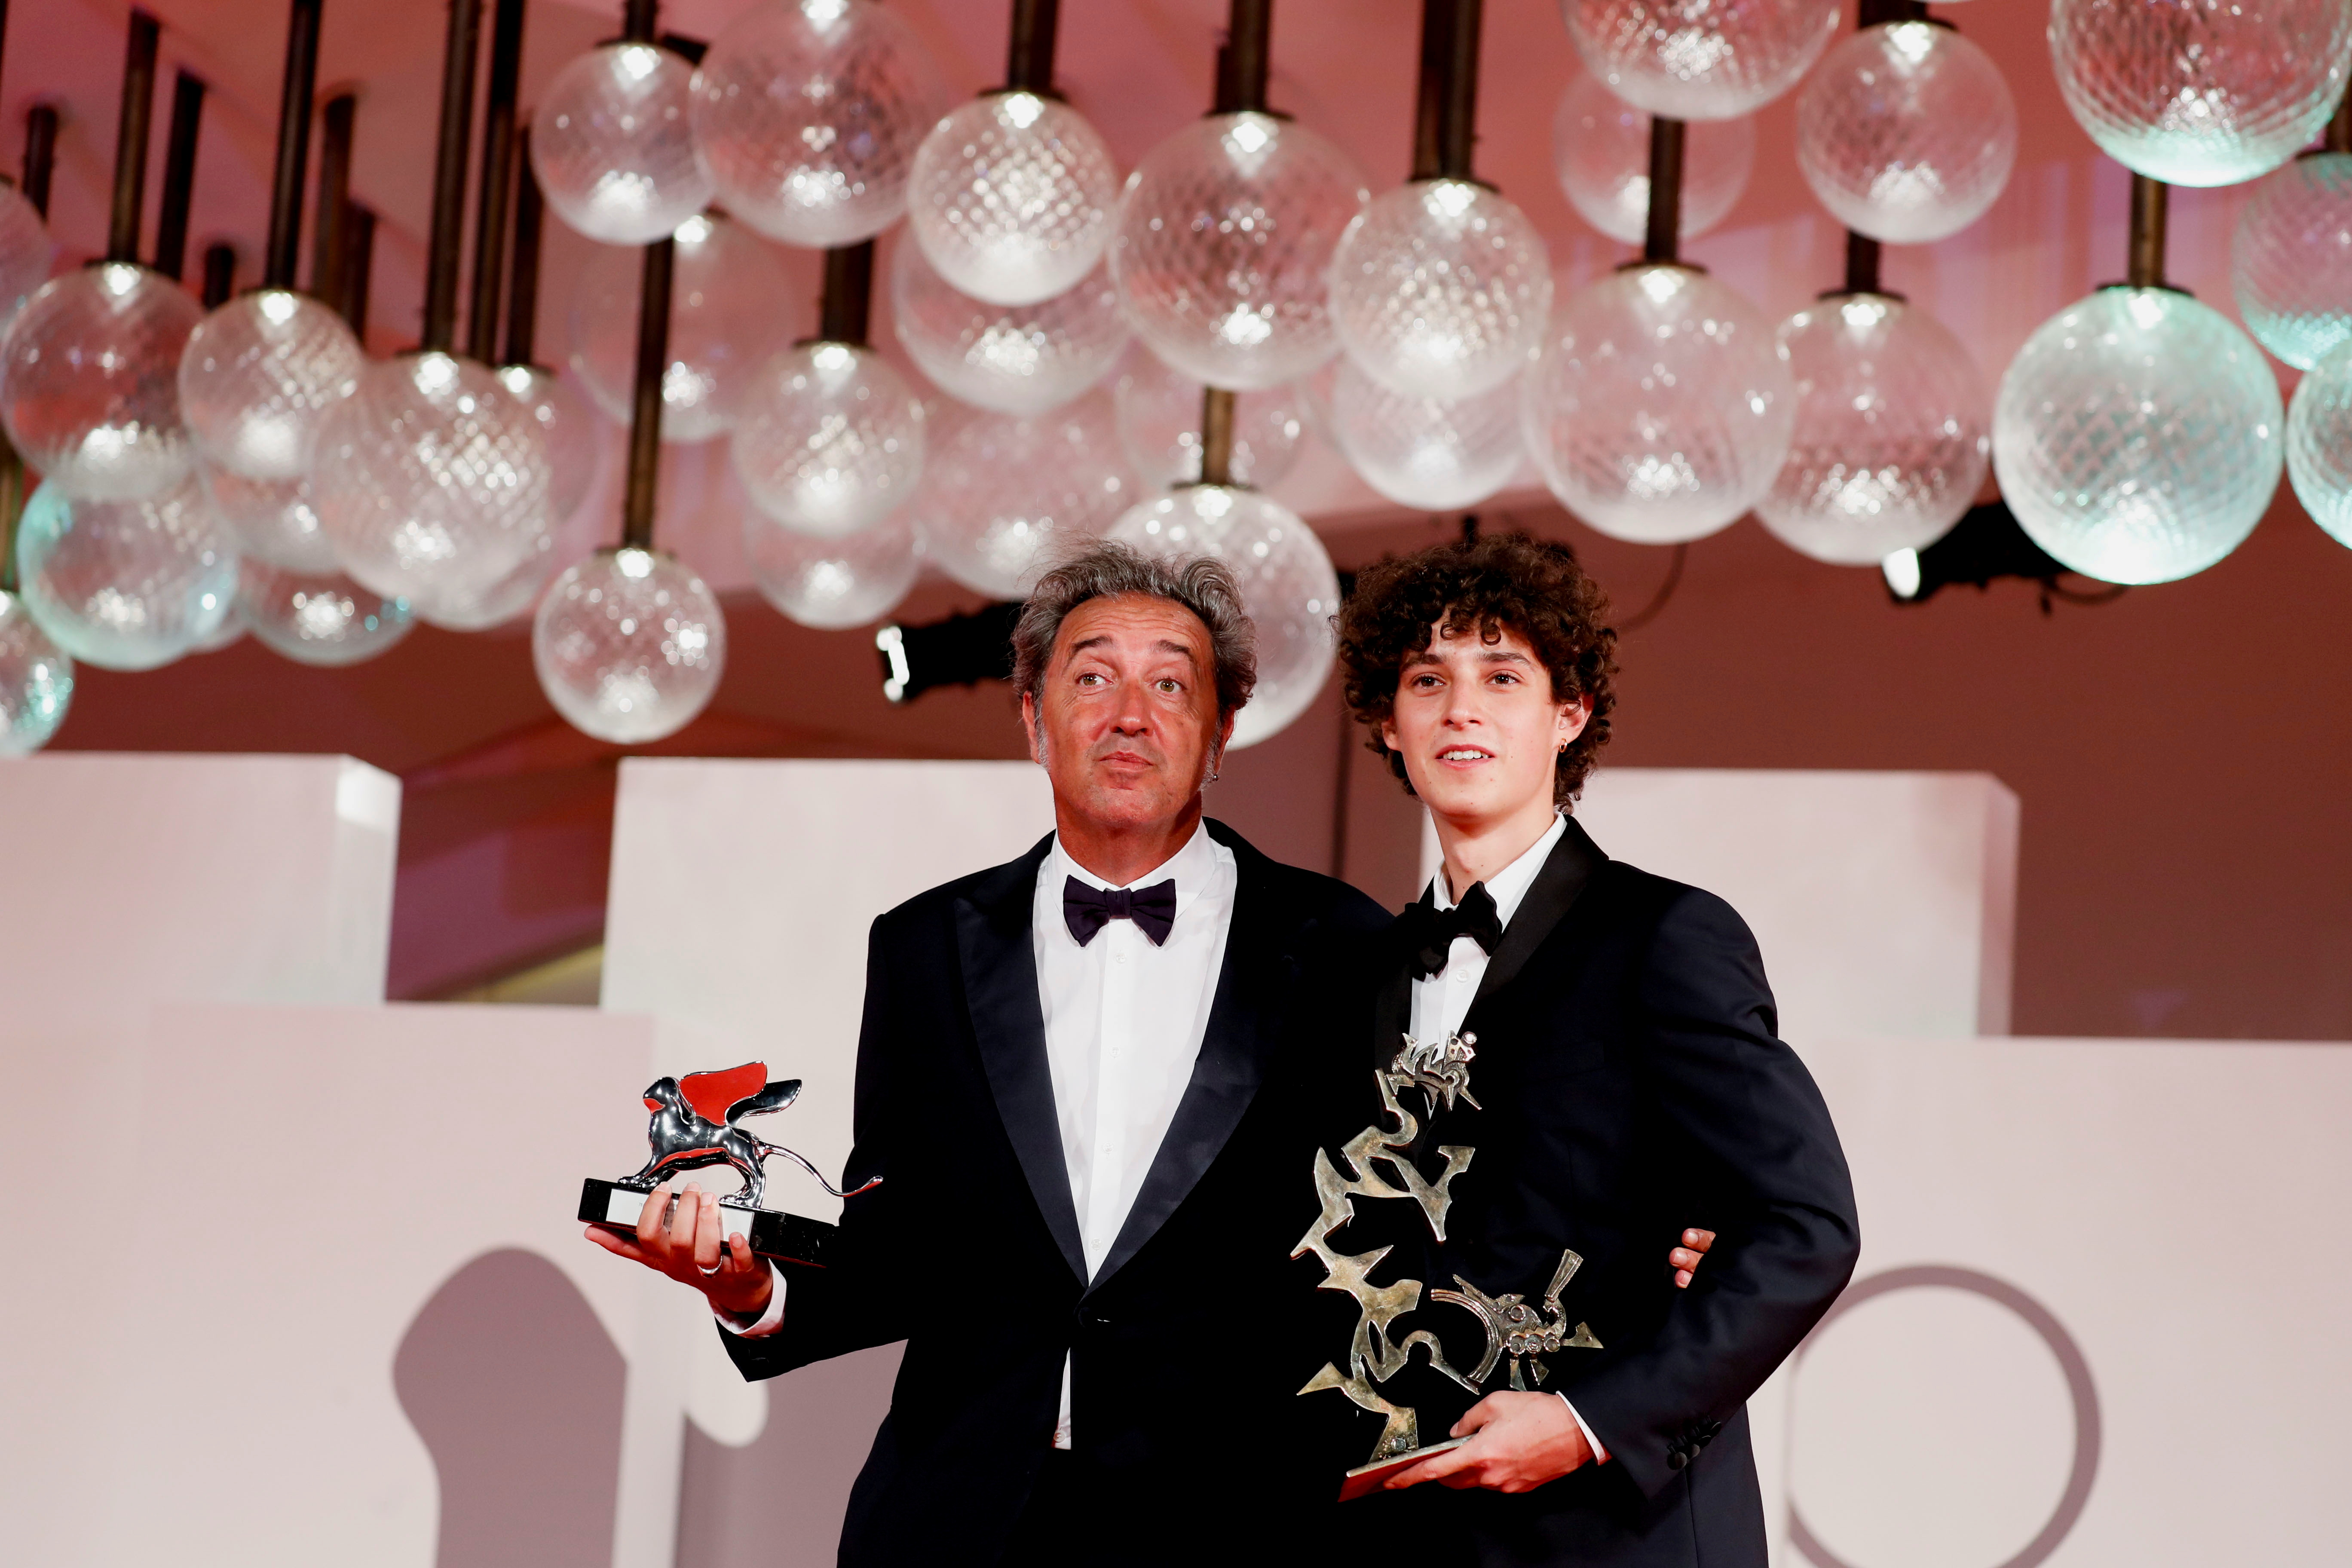 The 78th Venice Film Festival - Awards Ceremony - Venice, Italy, September 11, 2021 - Director Paolo Sorrentino and actor Filippo Scotti pose with their awards. REUTERS/Yara Nardi